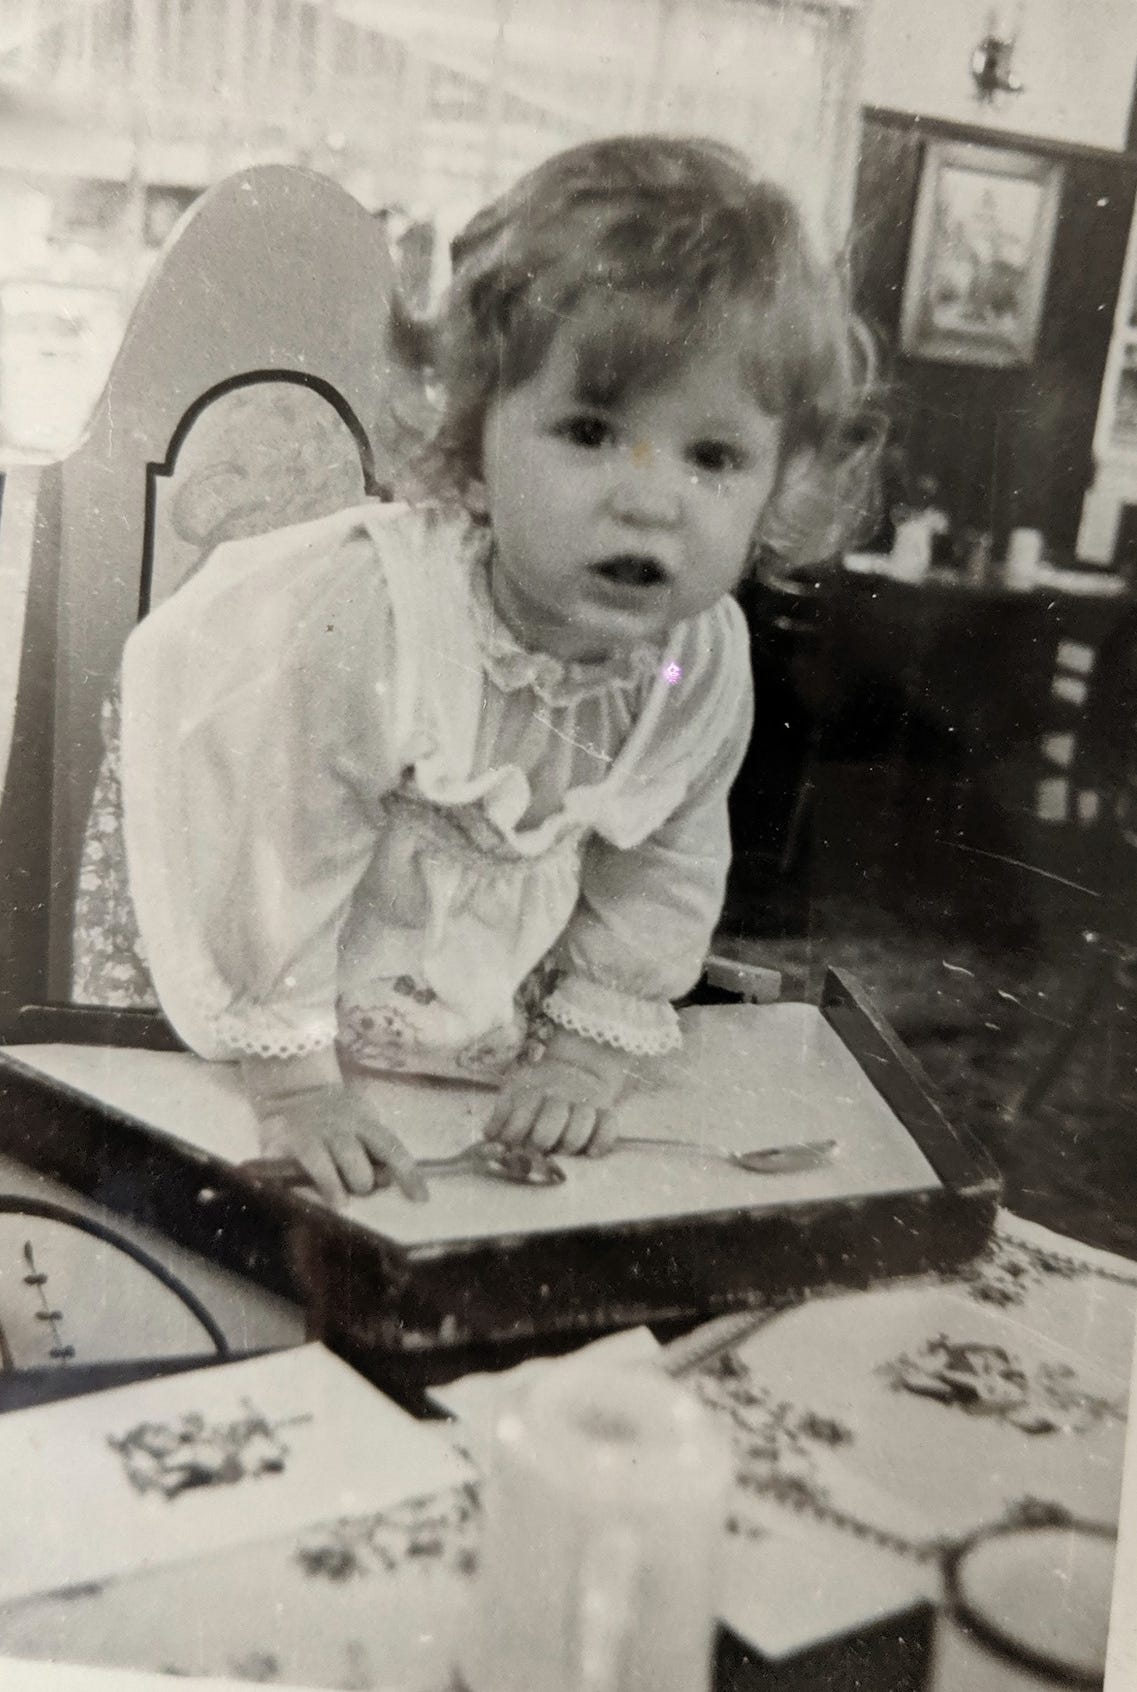 joanna schroeder as a child, black and white, curly haired child trying to escape a high chair and shouting